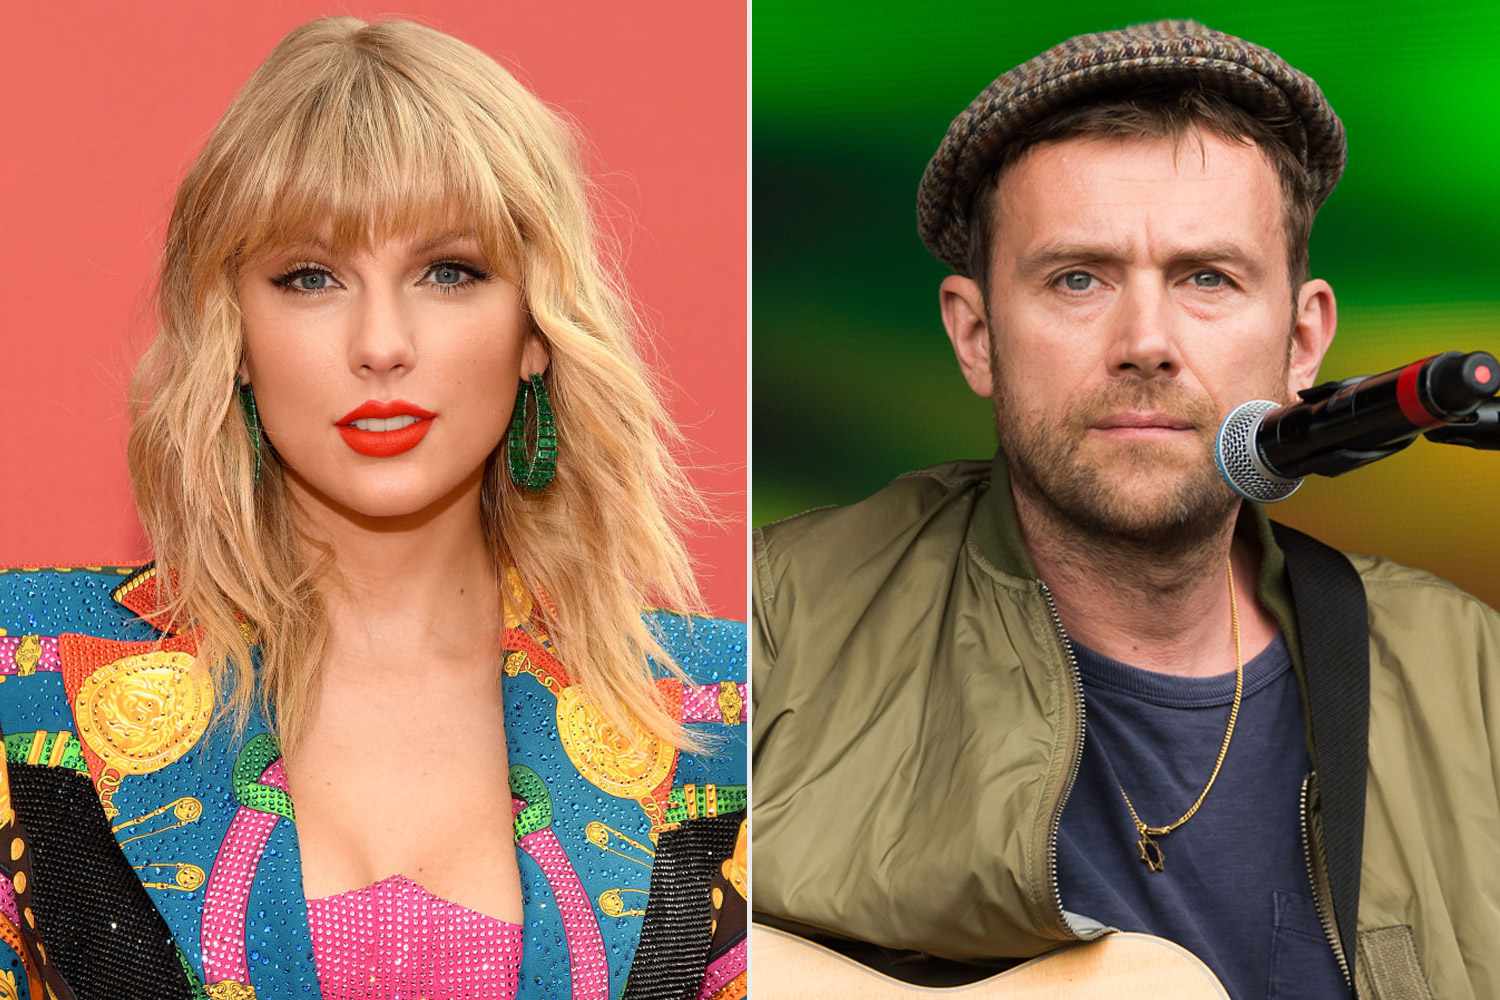 Taylor Swift Receives Apology from Blur's Damon Albarn After His Claim She 'Doesn't Write' Her Songs